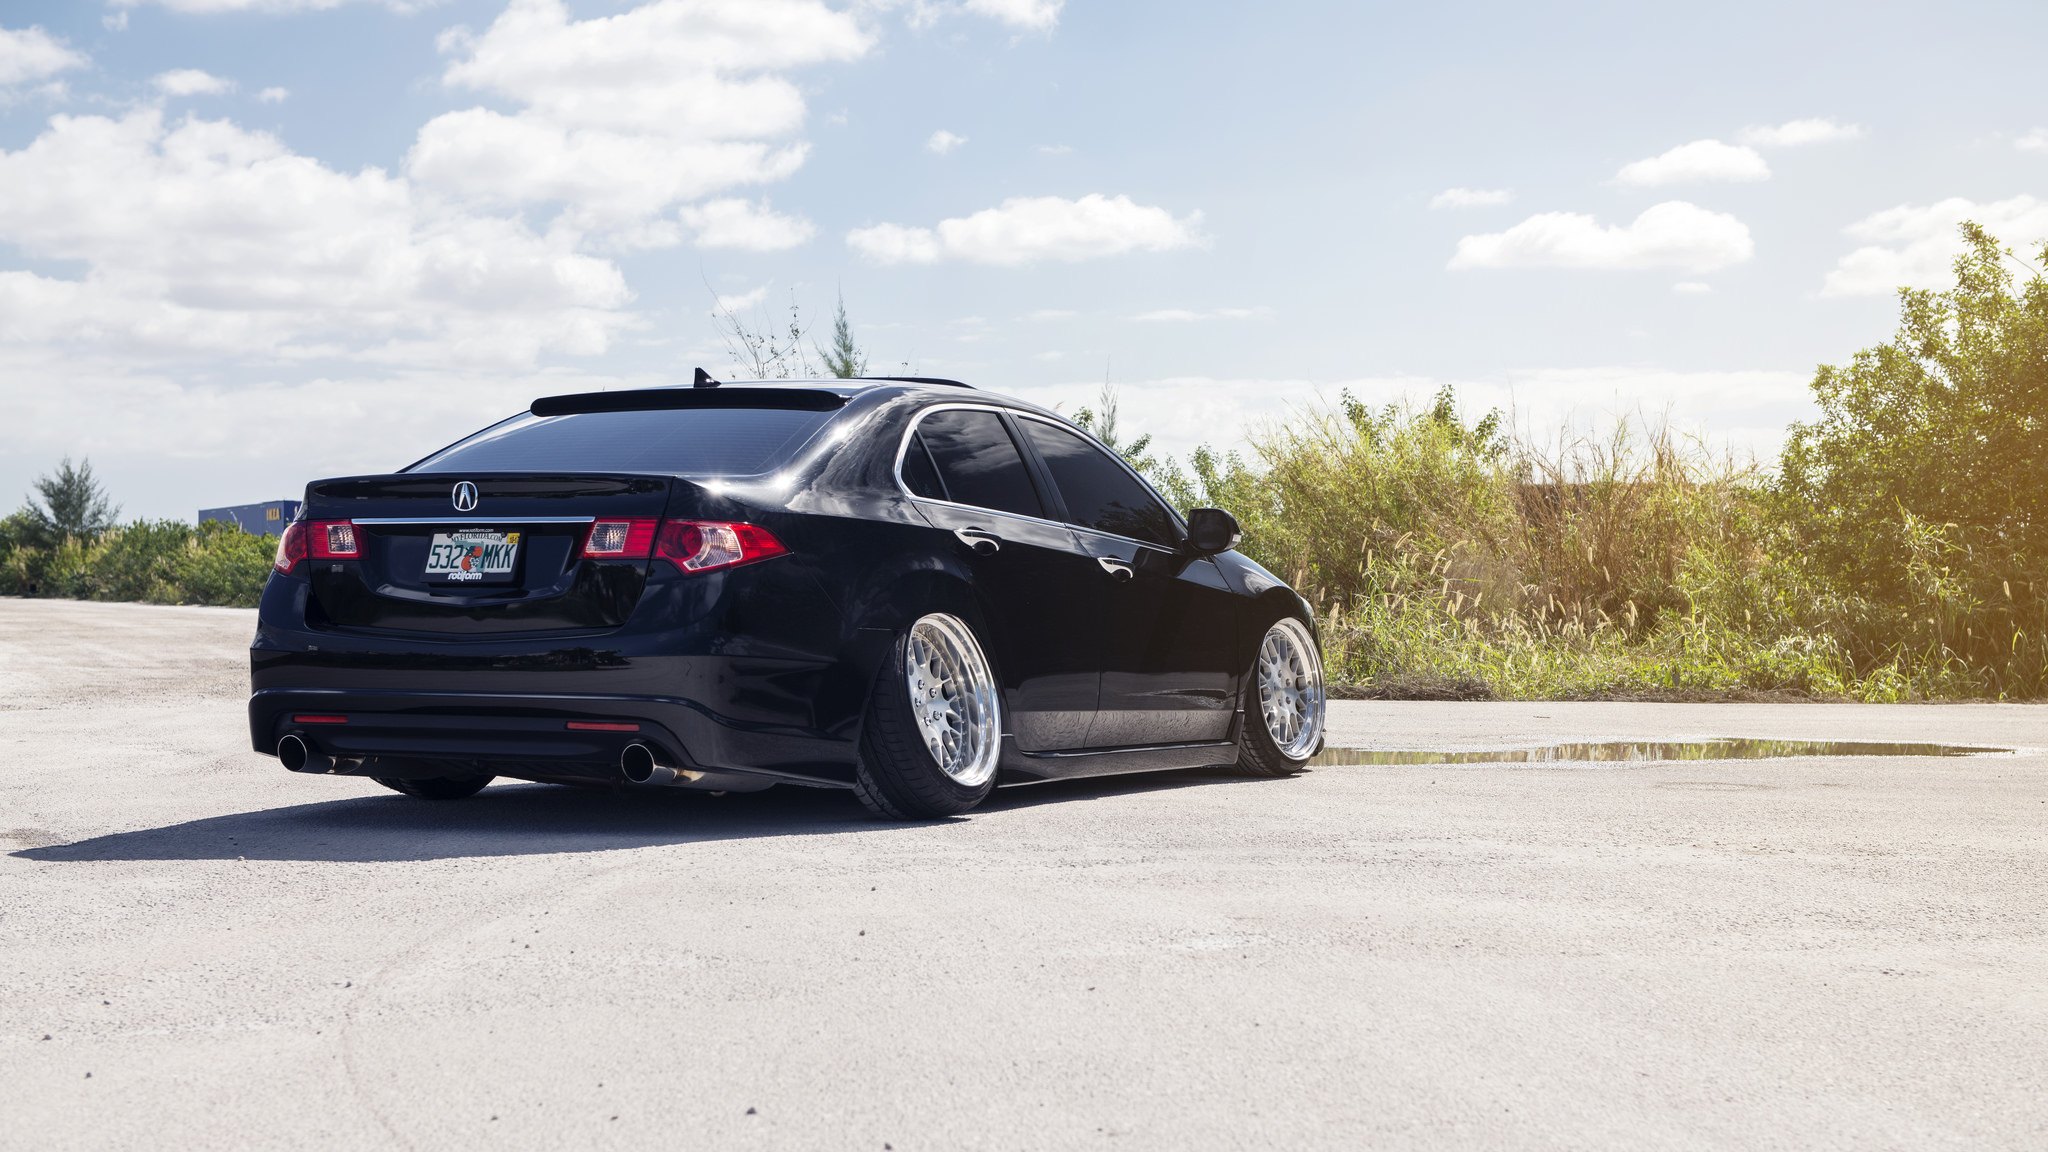 Slammed TSX With Radical Camber and Polished Rotiform Rims.